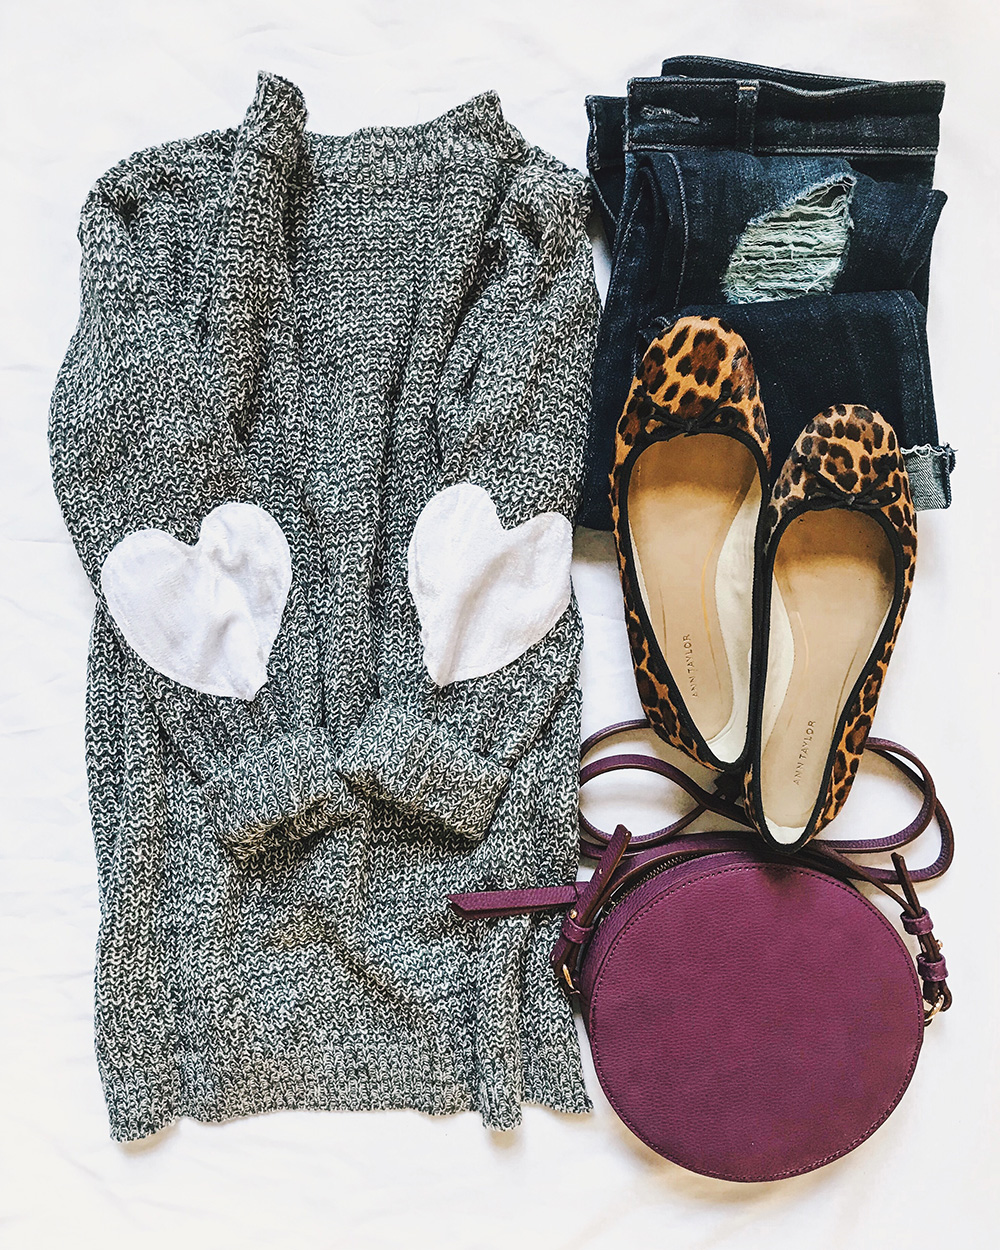 Heart Elbow Patch Sweater & Purple Circle Bag